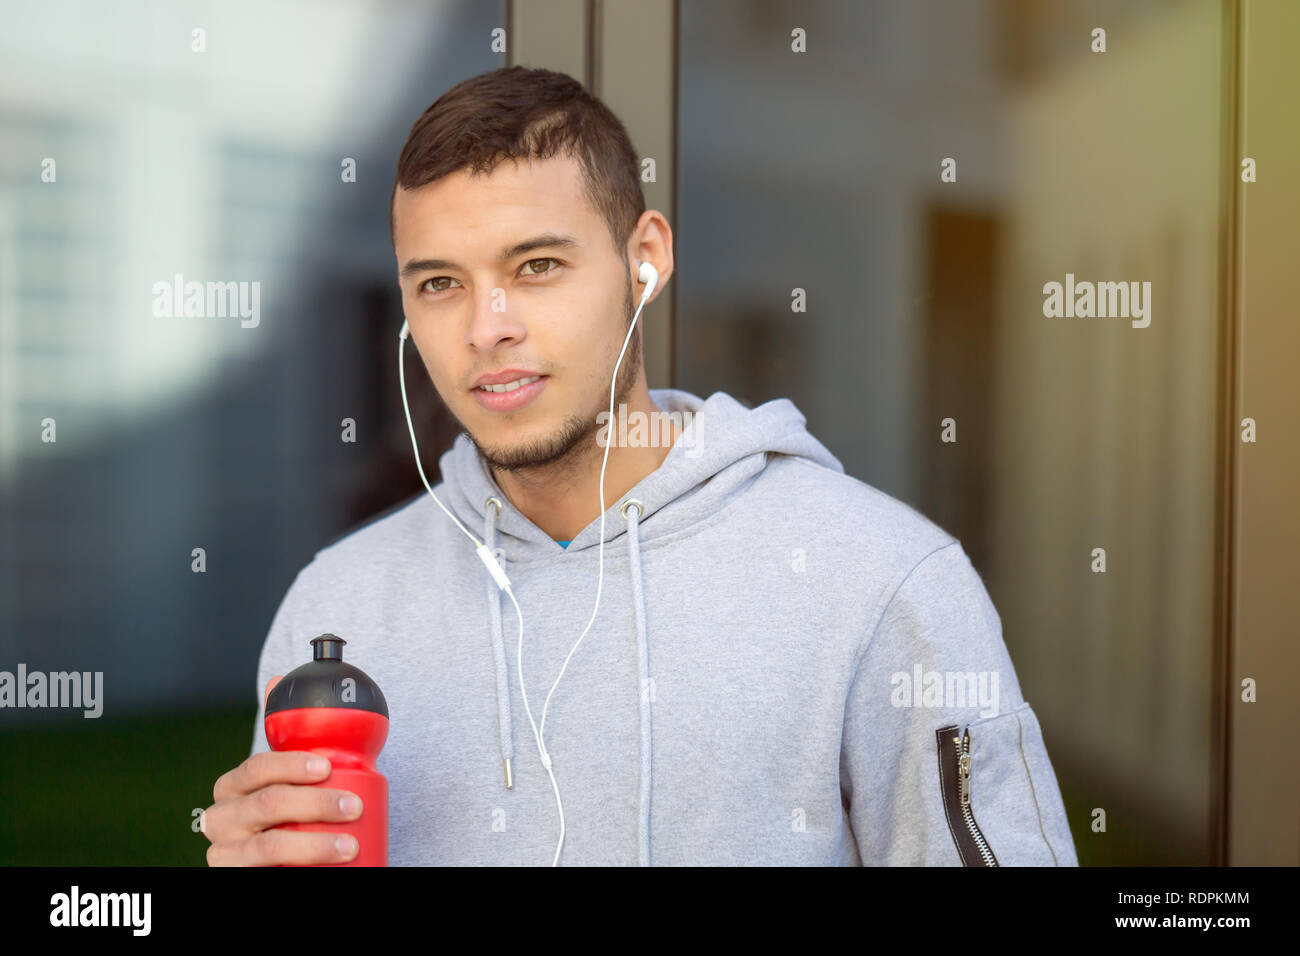 Drinking water young man runner running looking thinking jogging sports training fitness outdoor Stock Photo